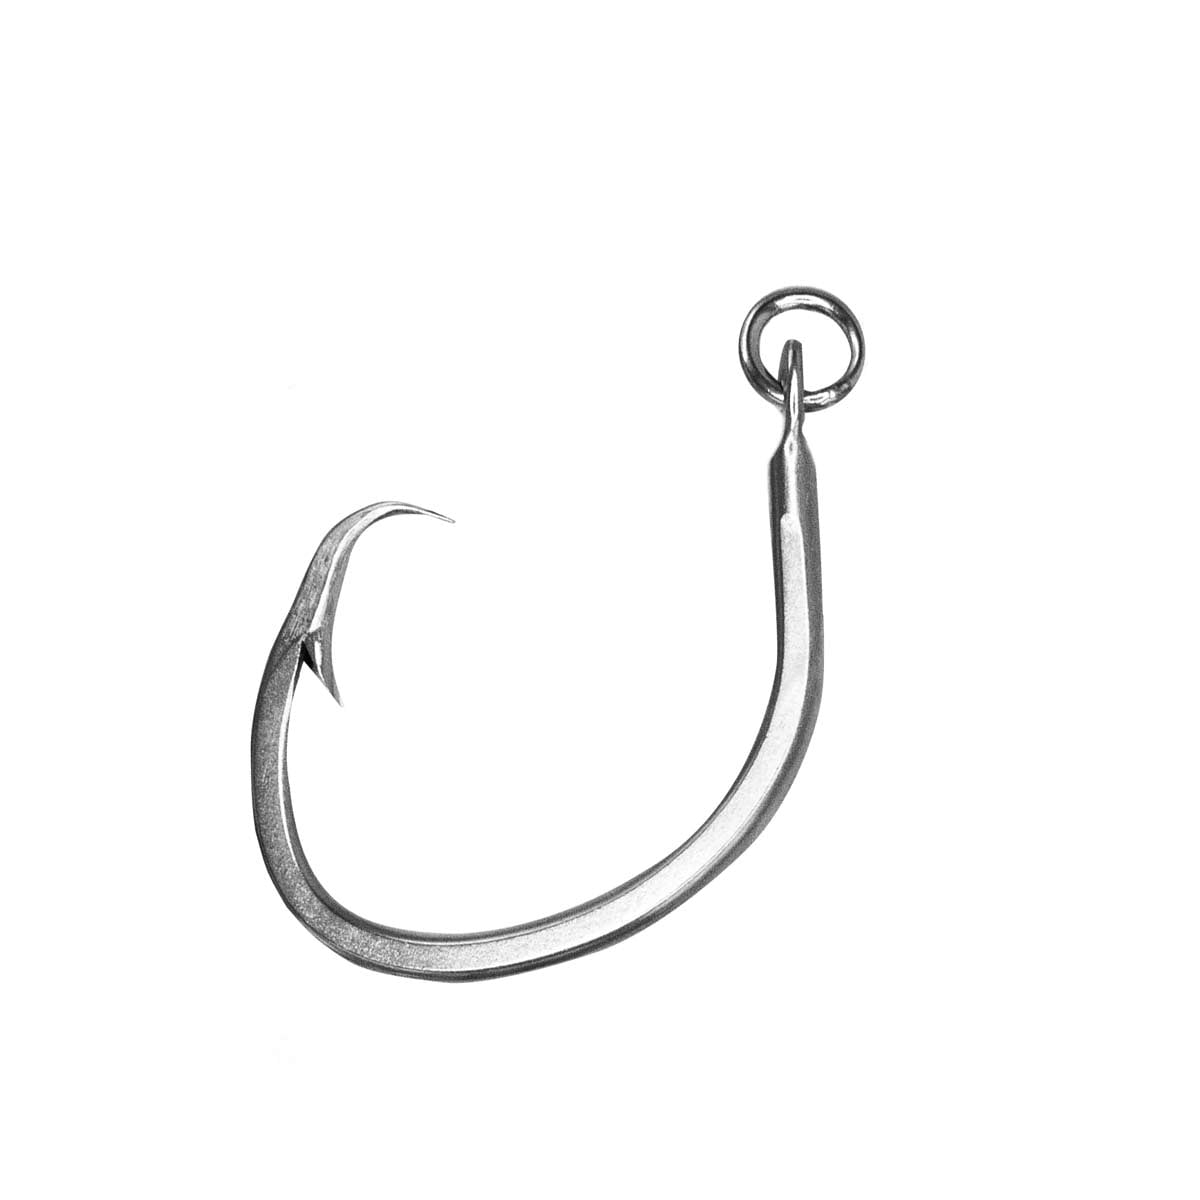 Details about   10Pcs High Carbon Steel Fishing Hook Strong Double Strength Sharp Barbed Hooks